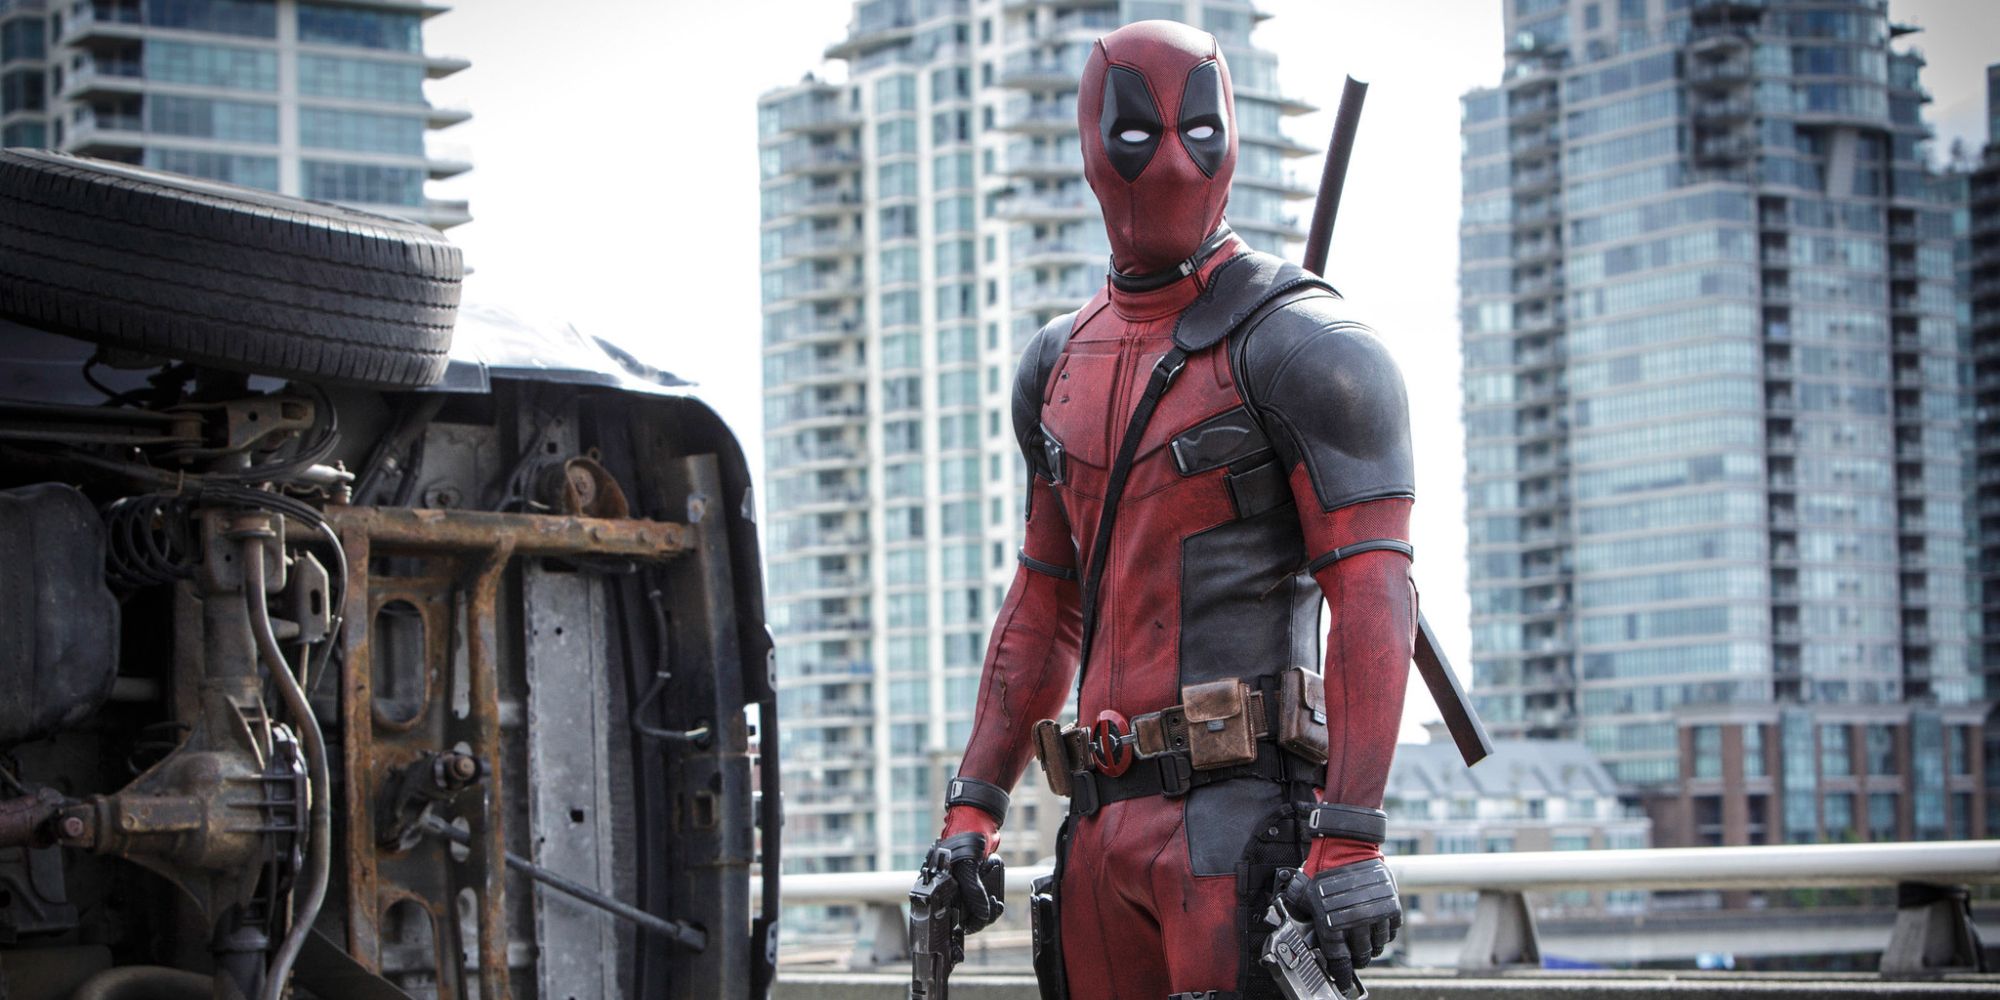 Deadpool standing on the freeway holding a gun.